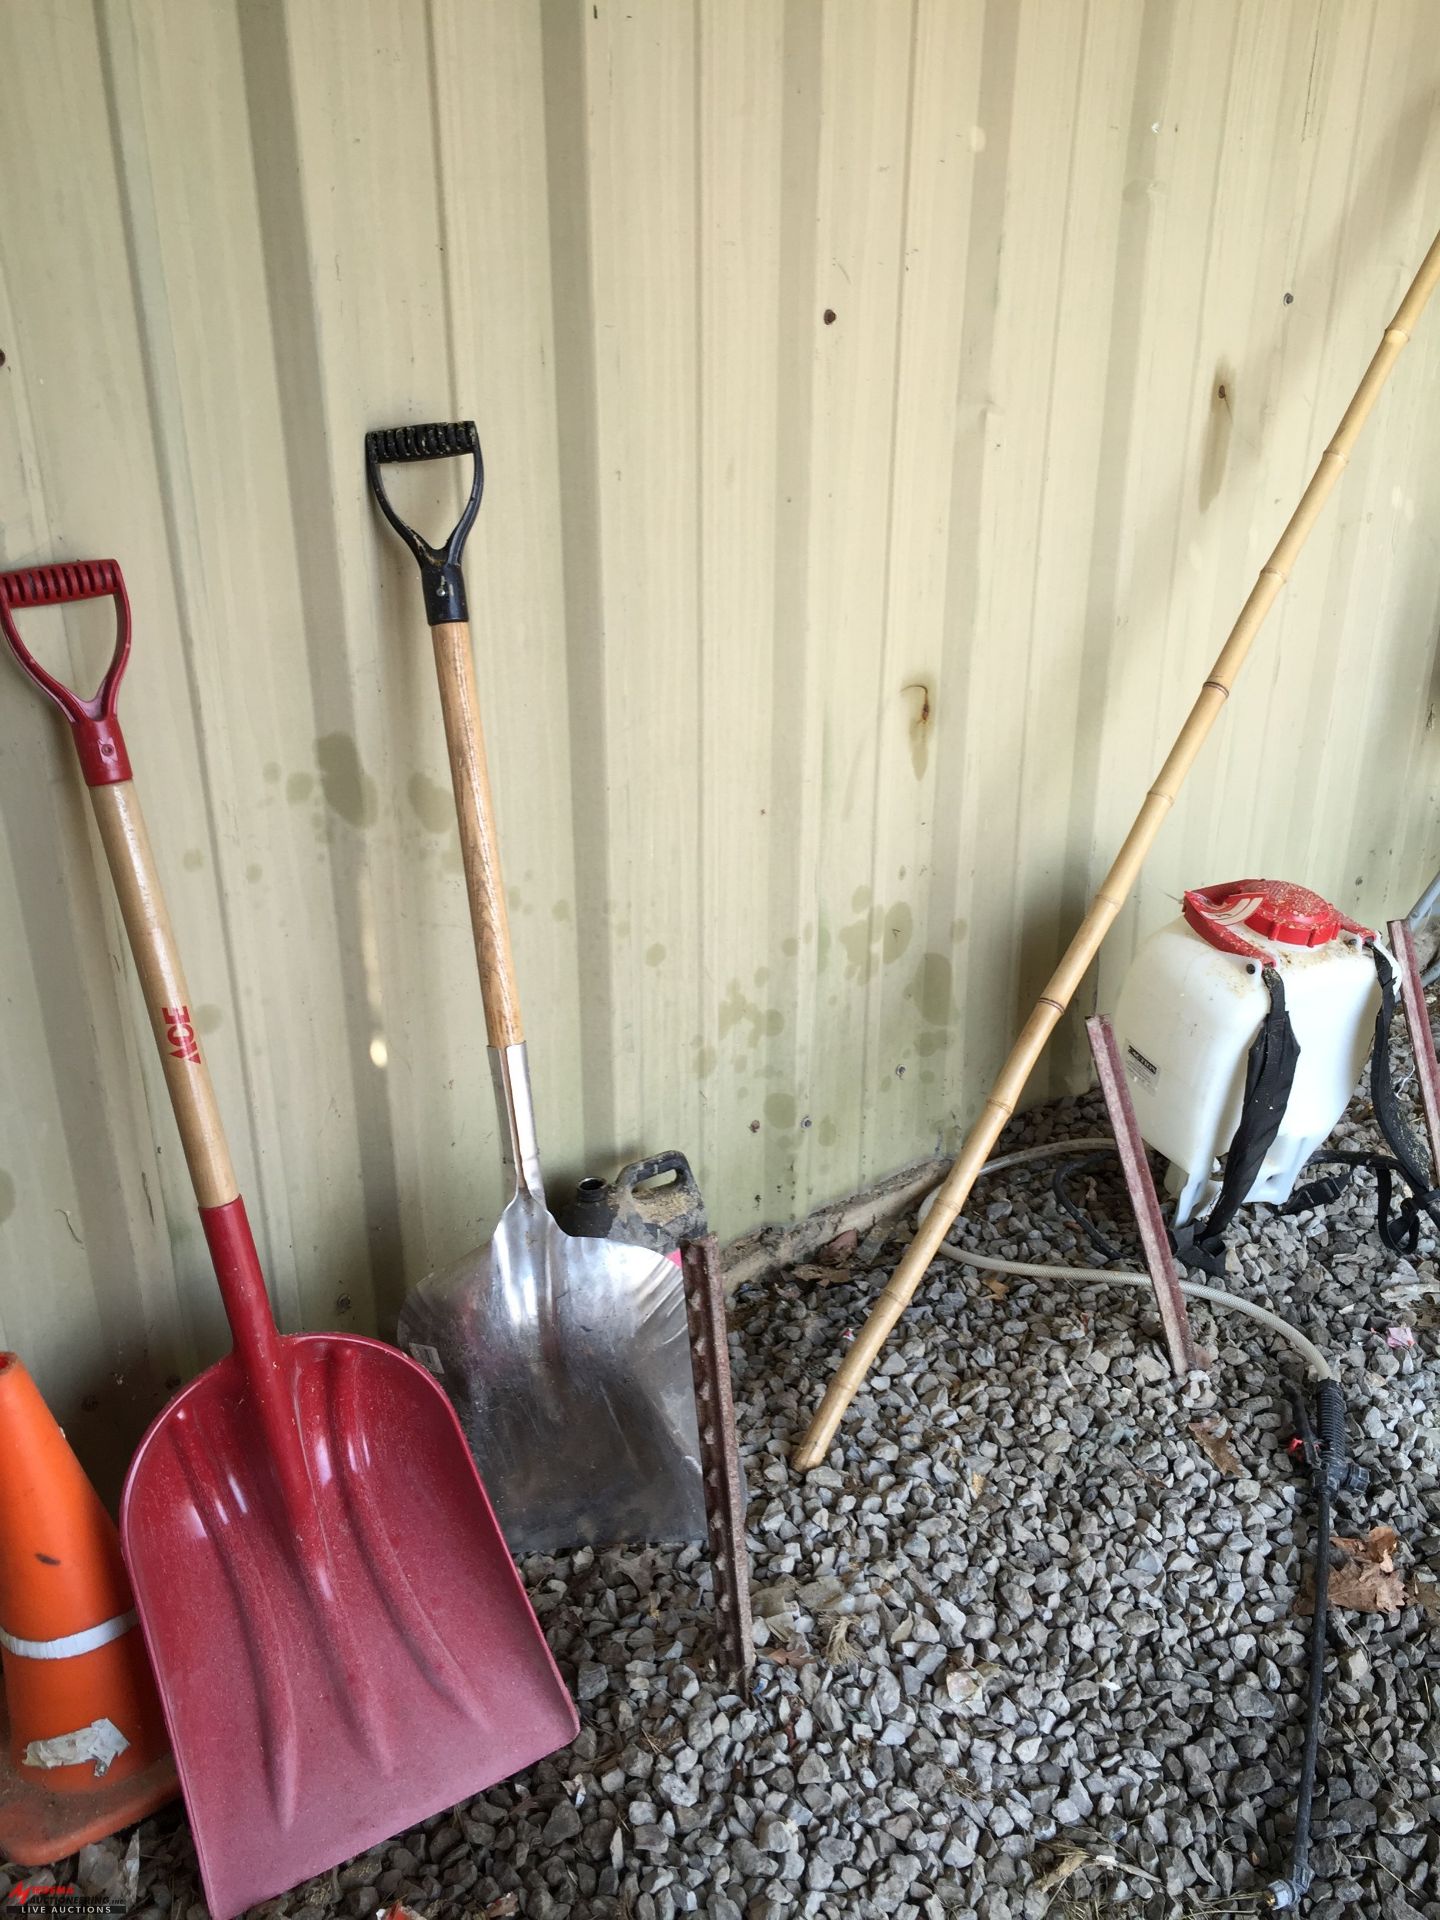 CONTENTS OF SHED, INCLUDES FENCE POSTS, SHOVELS